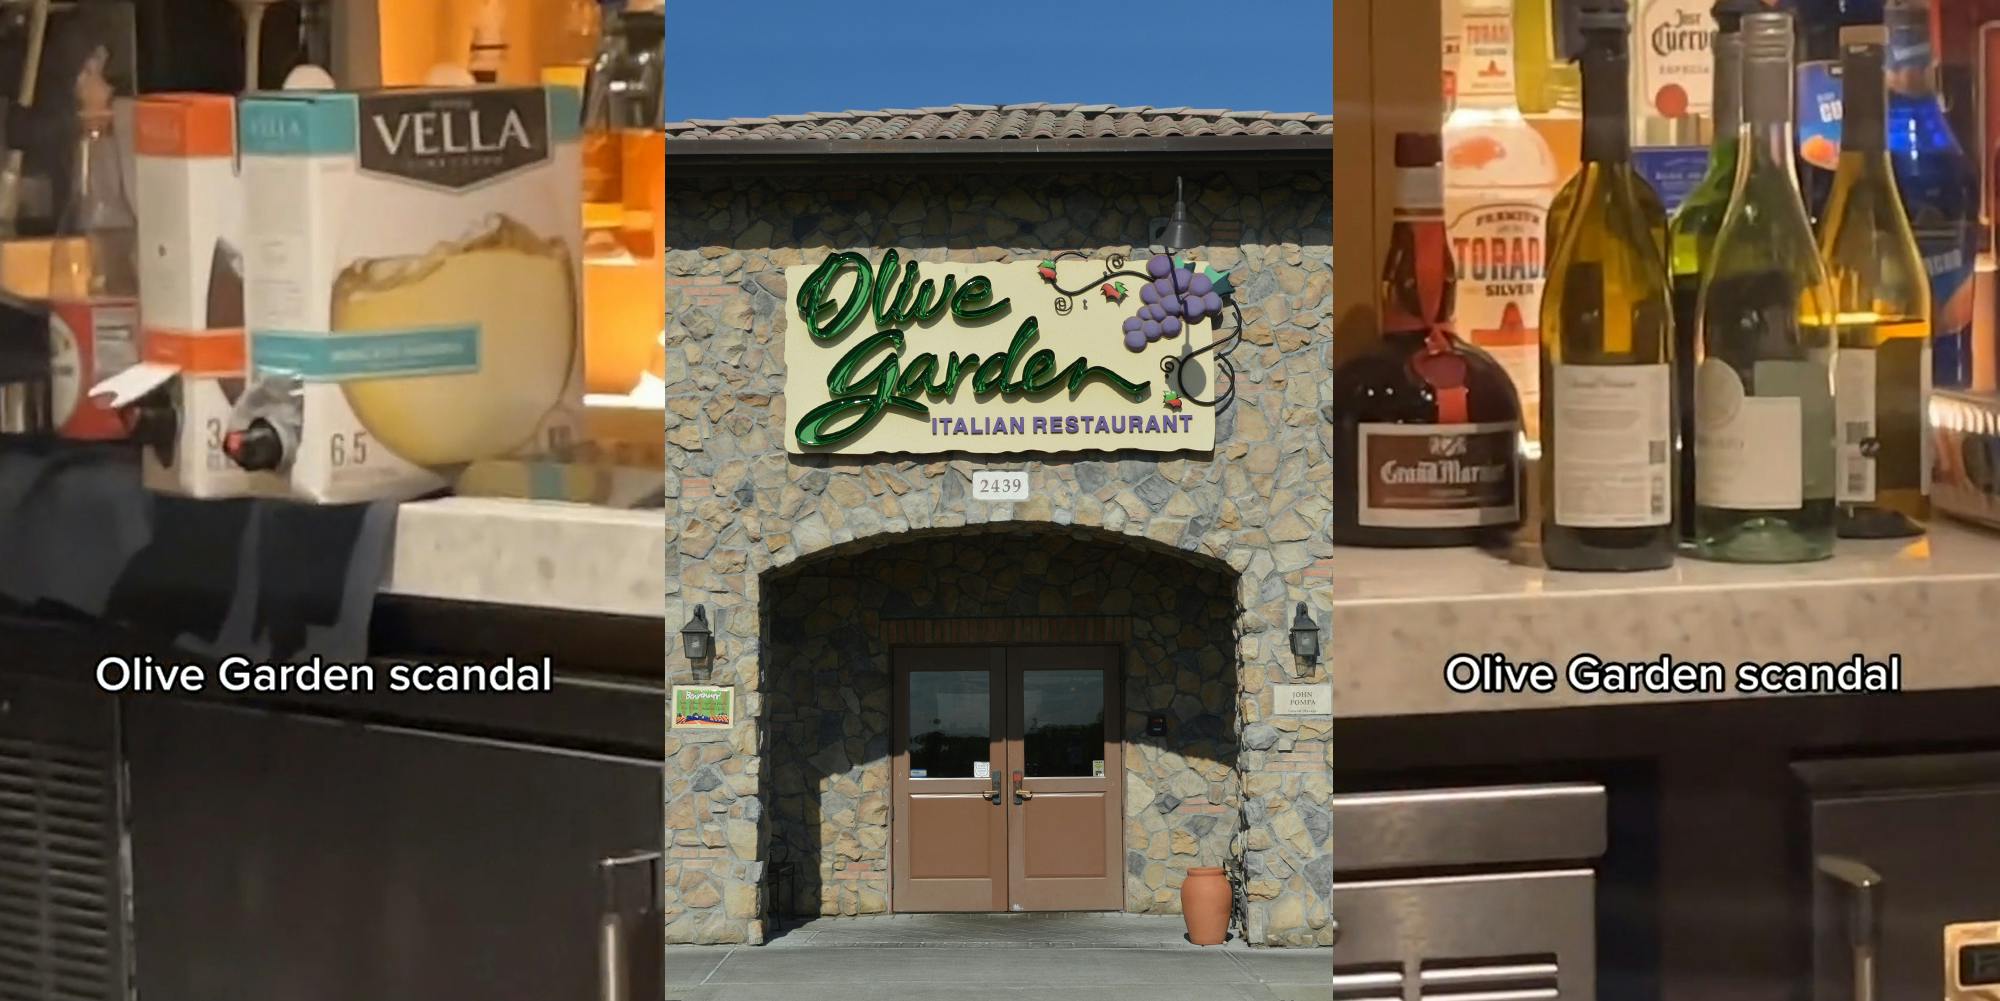 Customer Claims Olive Garden Pours Boxed Wine Into Bottles